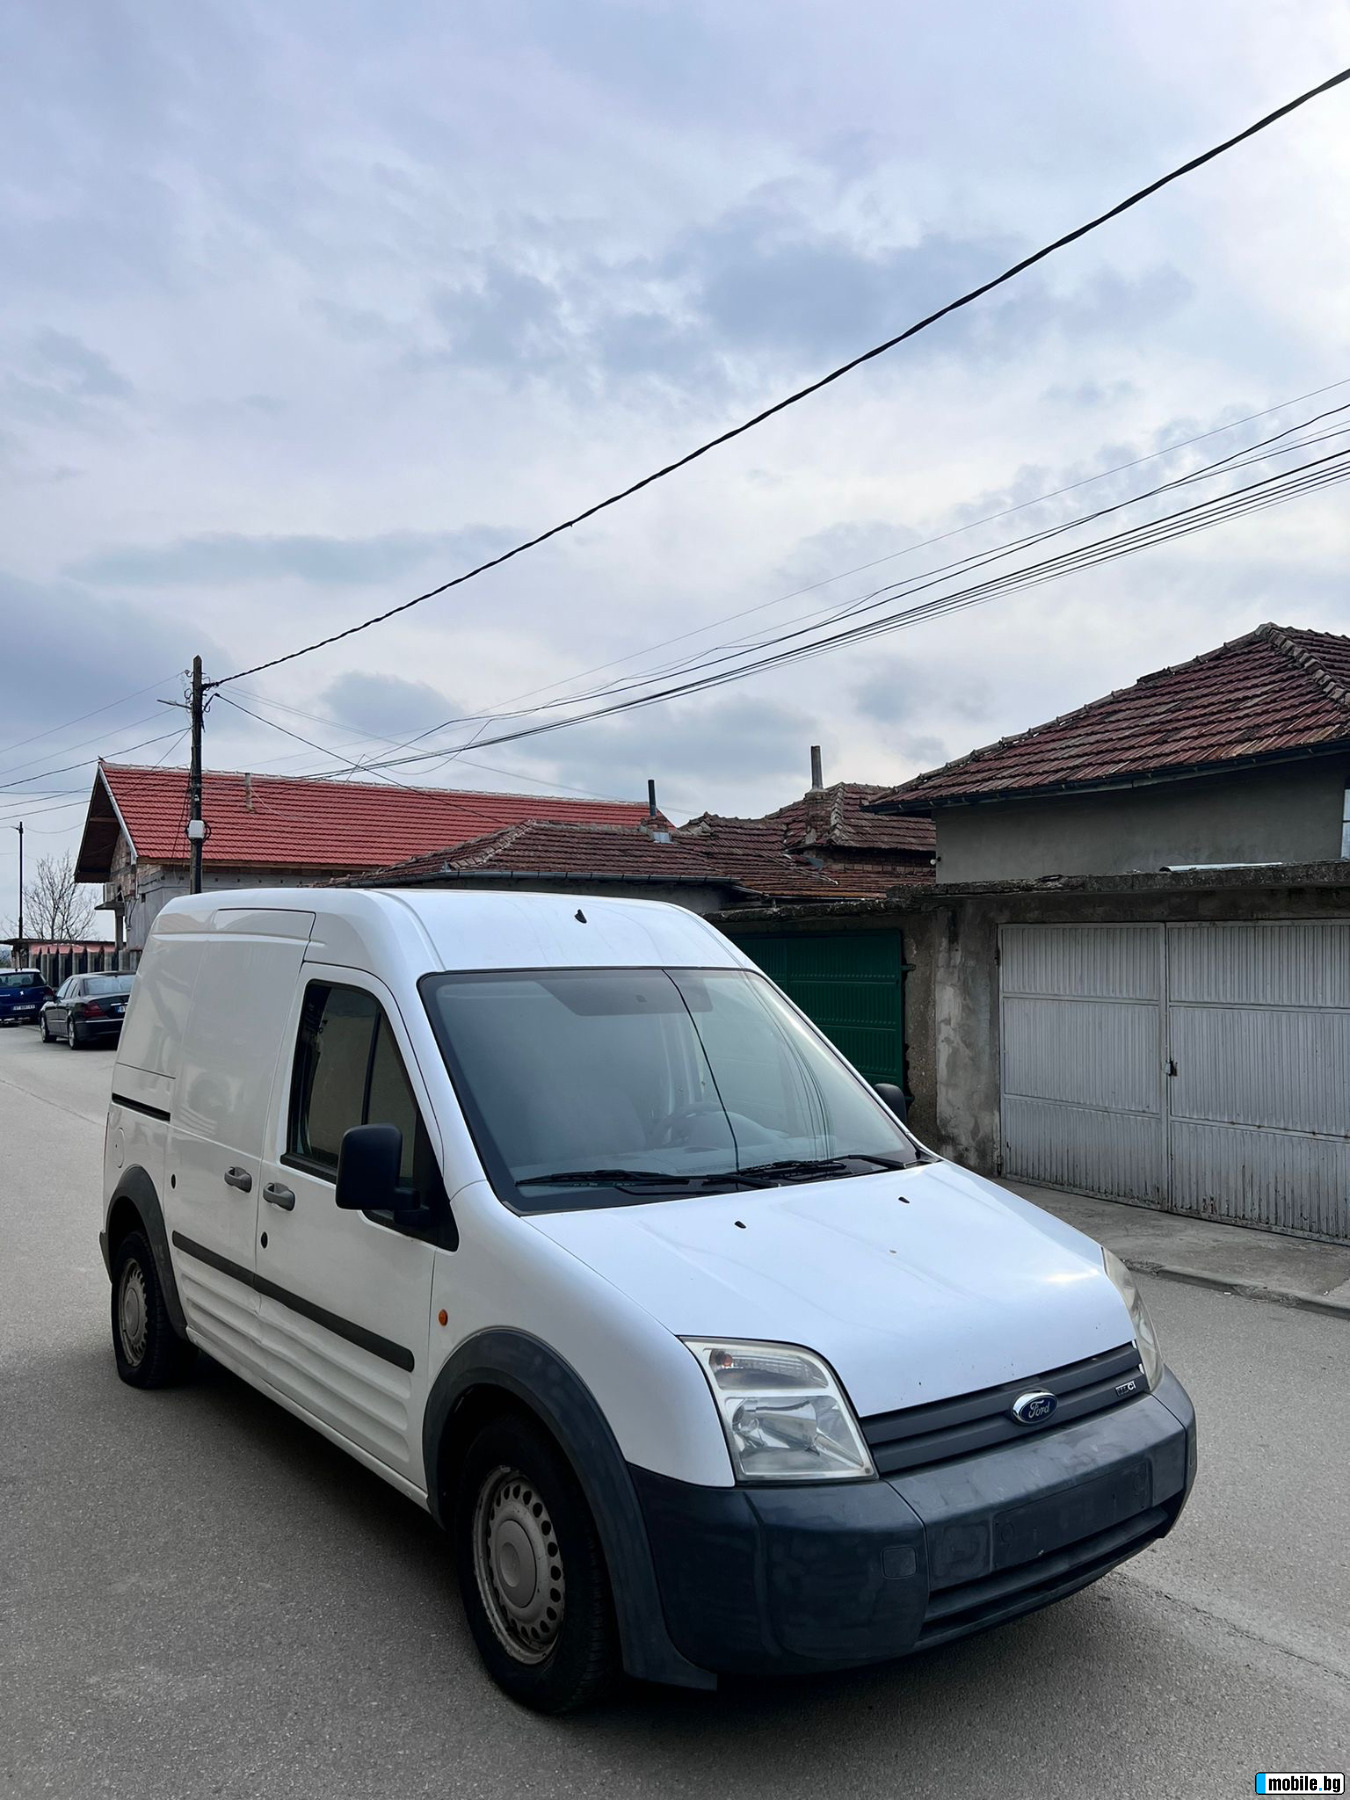 Ford Connect T230L 1.8TDCi | Mobile.bg   3